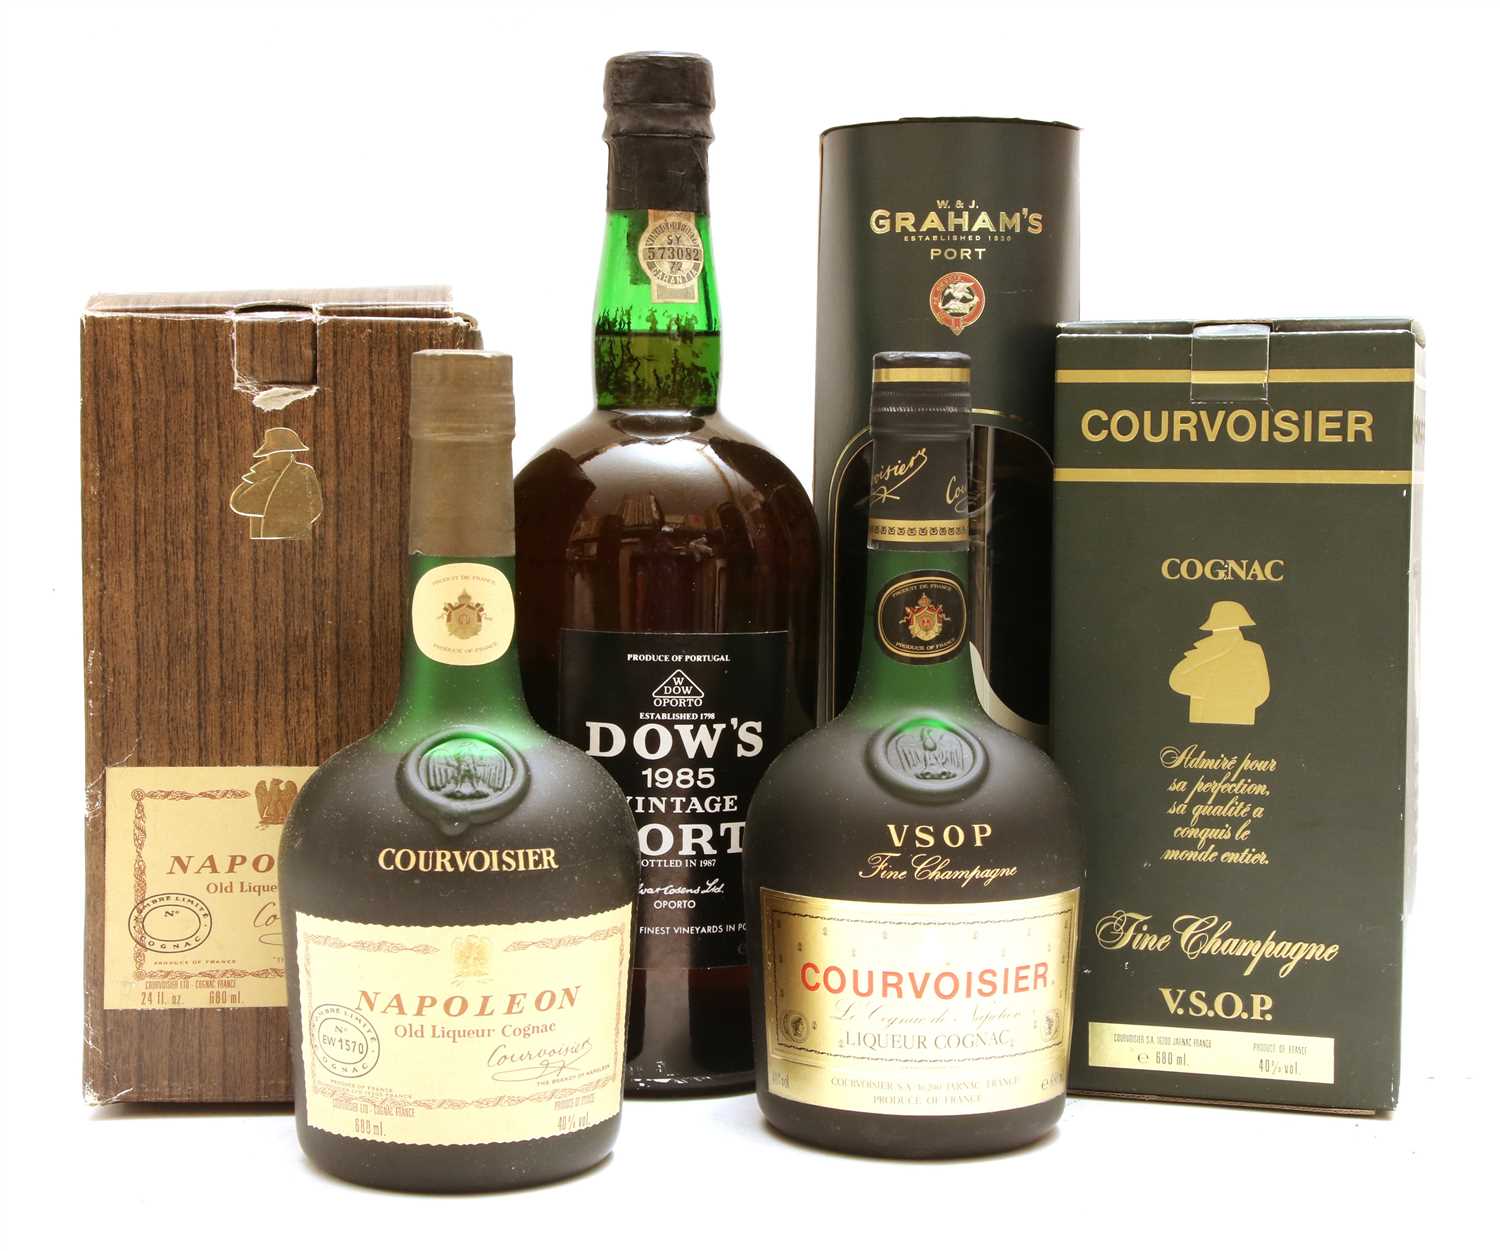 Lot 210 - Assorted Cognac and Port to include: Courvoisier, Dow's and Graham's, three bottles and one magnum